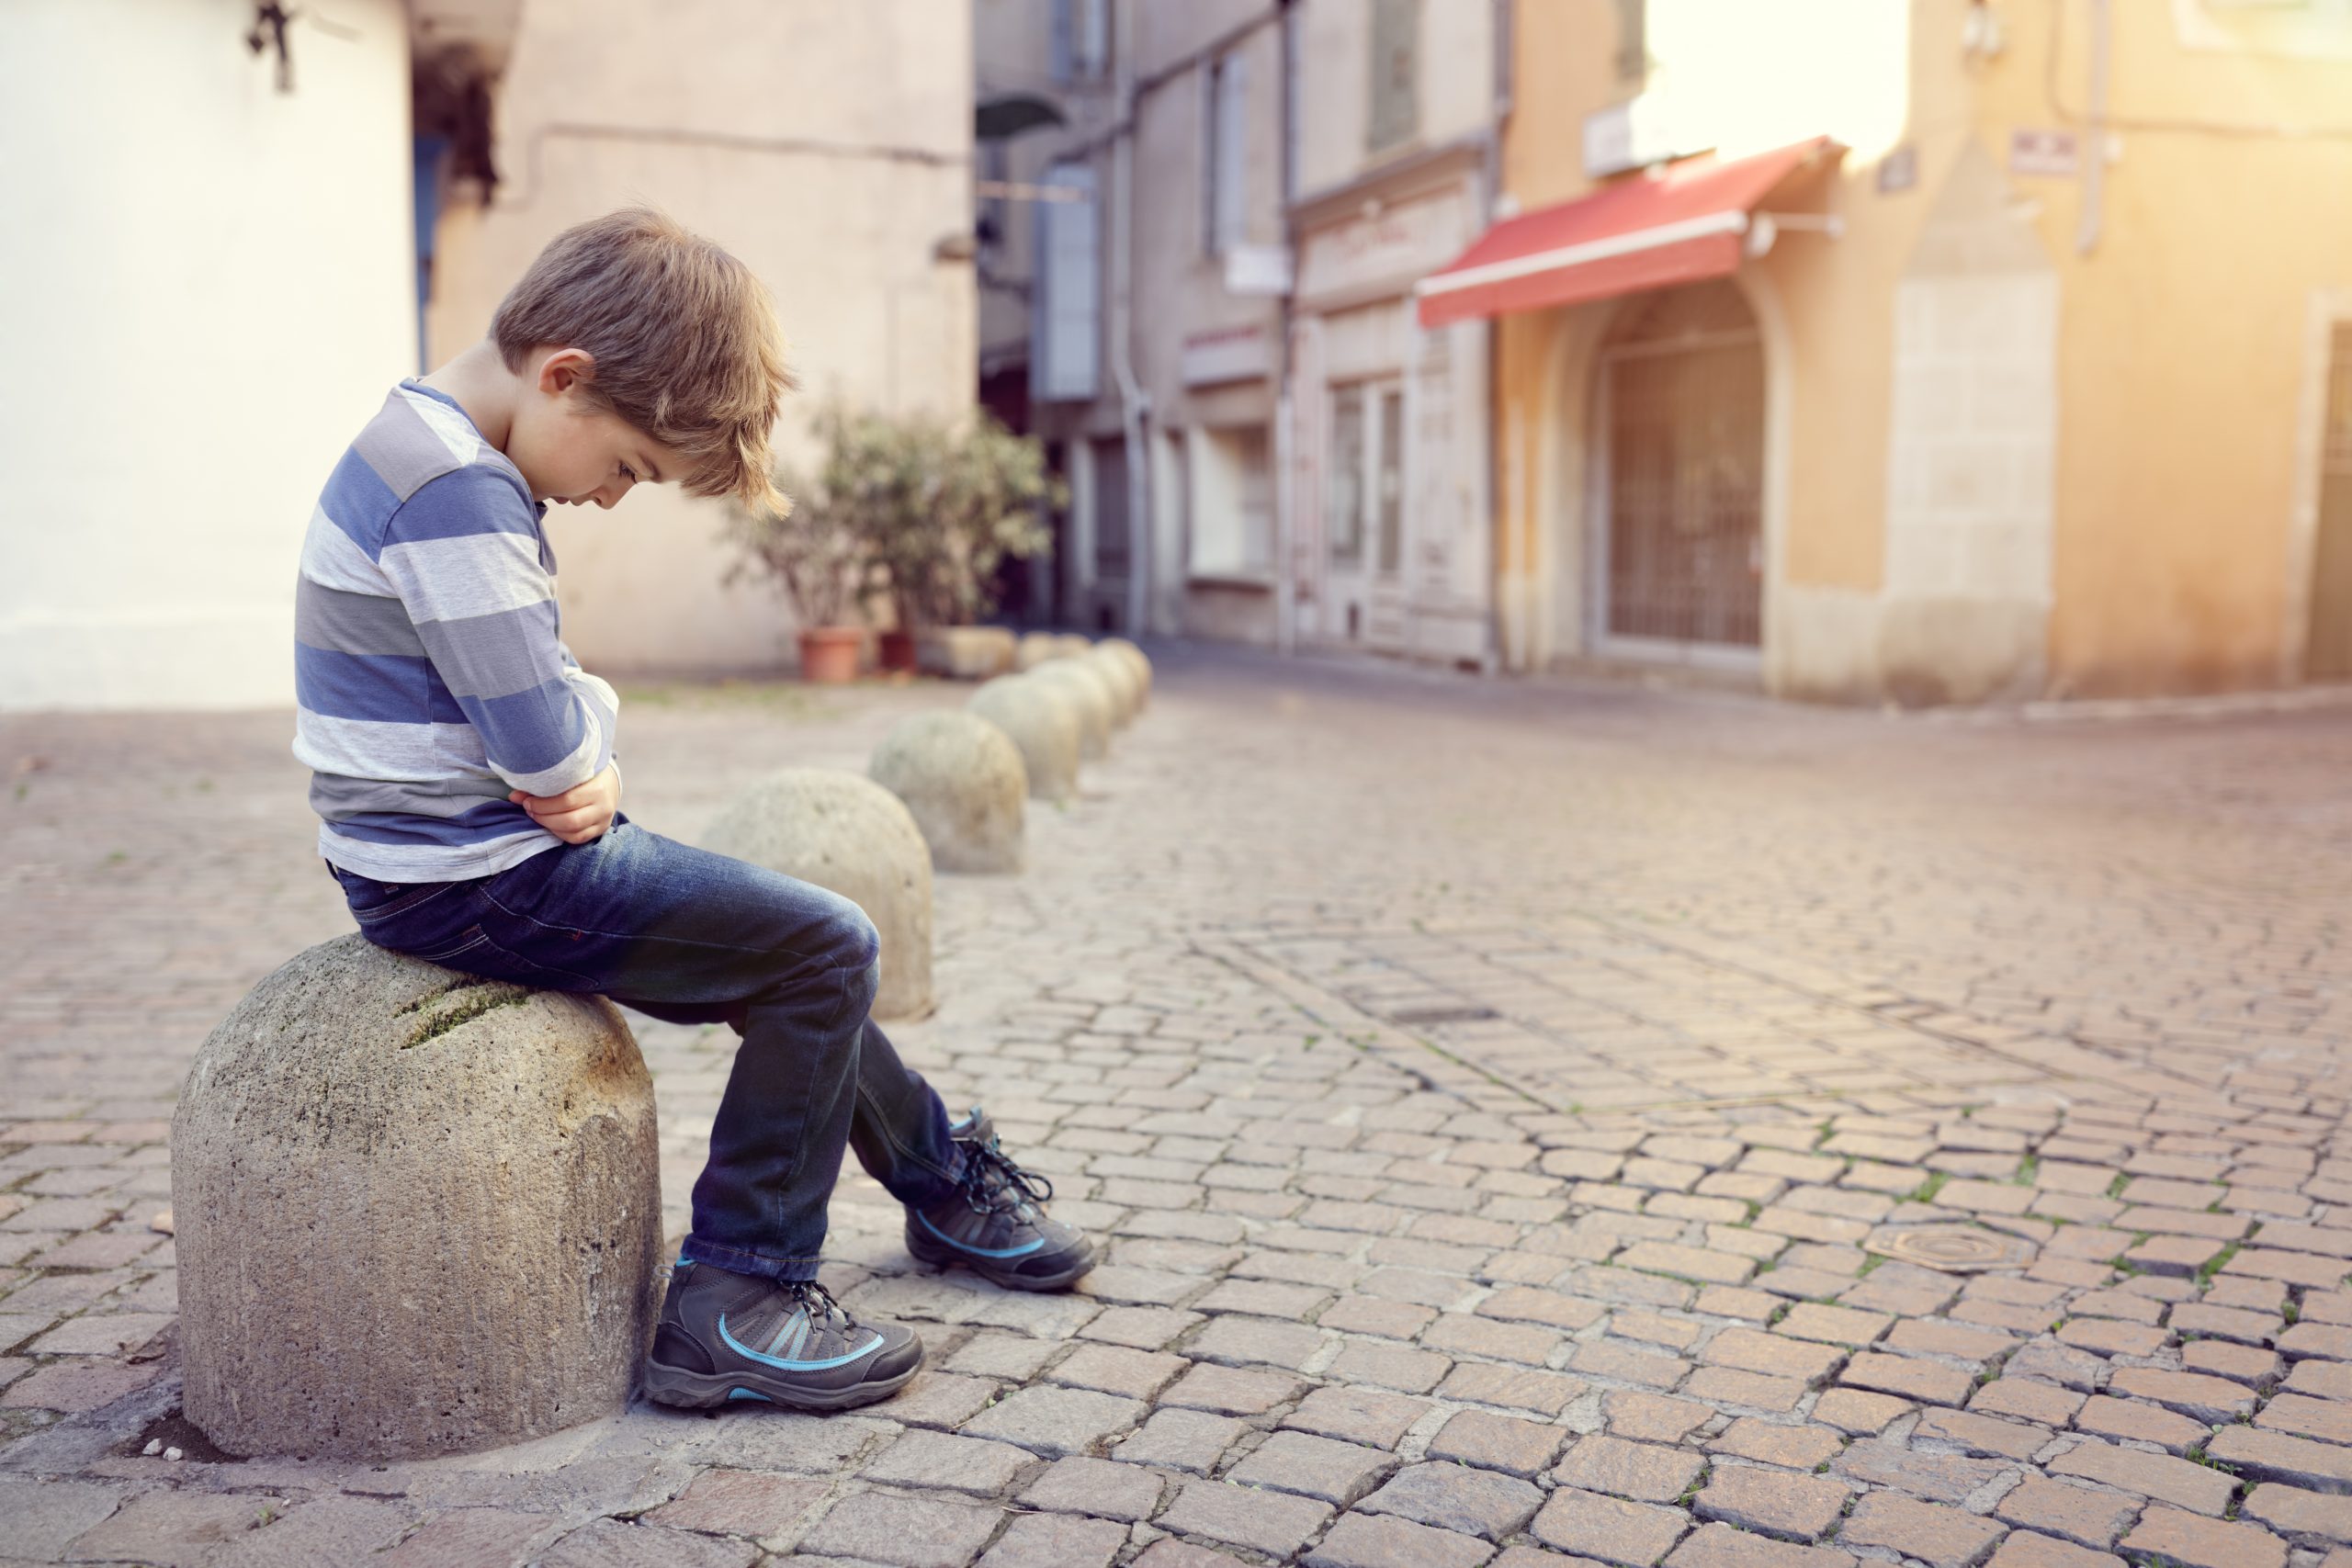 A young boy sits alone on a stone bollard in the middle of a quiet cobblestone street. He is wearing a striped shirt and jeans, and appears to be looking down, with his arms crossed. The buildings around him are old with pastel-colored facades, reminiscent of scenes near a trauma clinic or mental hospital.